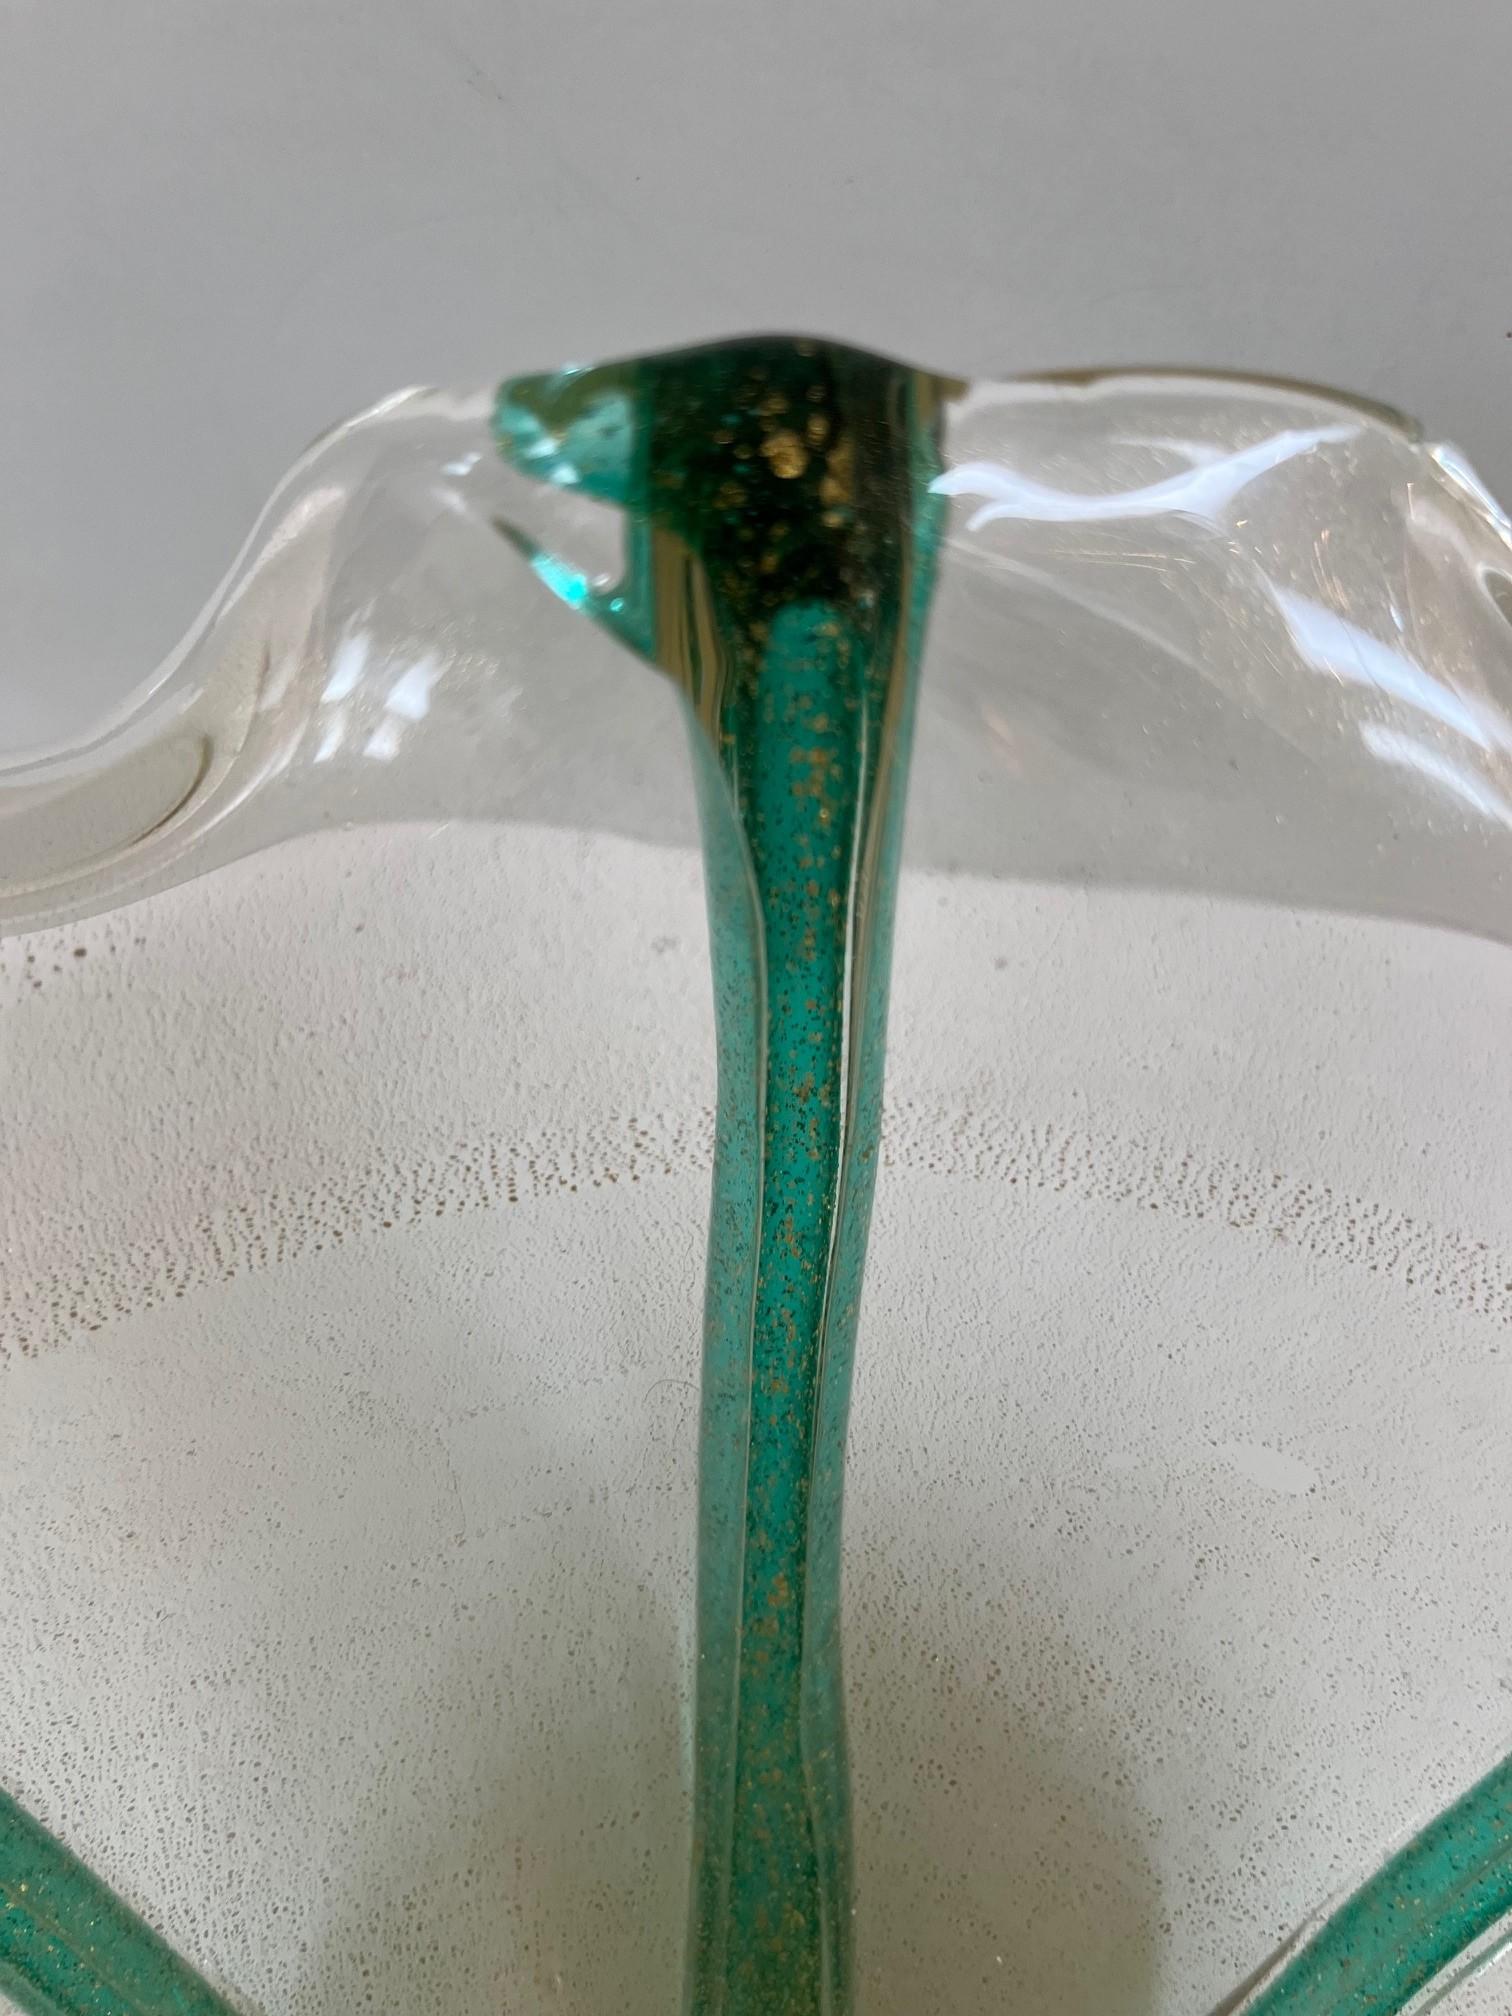 Vintage Clear, Gold and Green Murano Glass Bowl, Green Glass Ropes Connecting Spouts to the Base, Designed by Archimede Segu so 